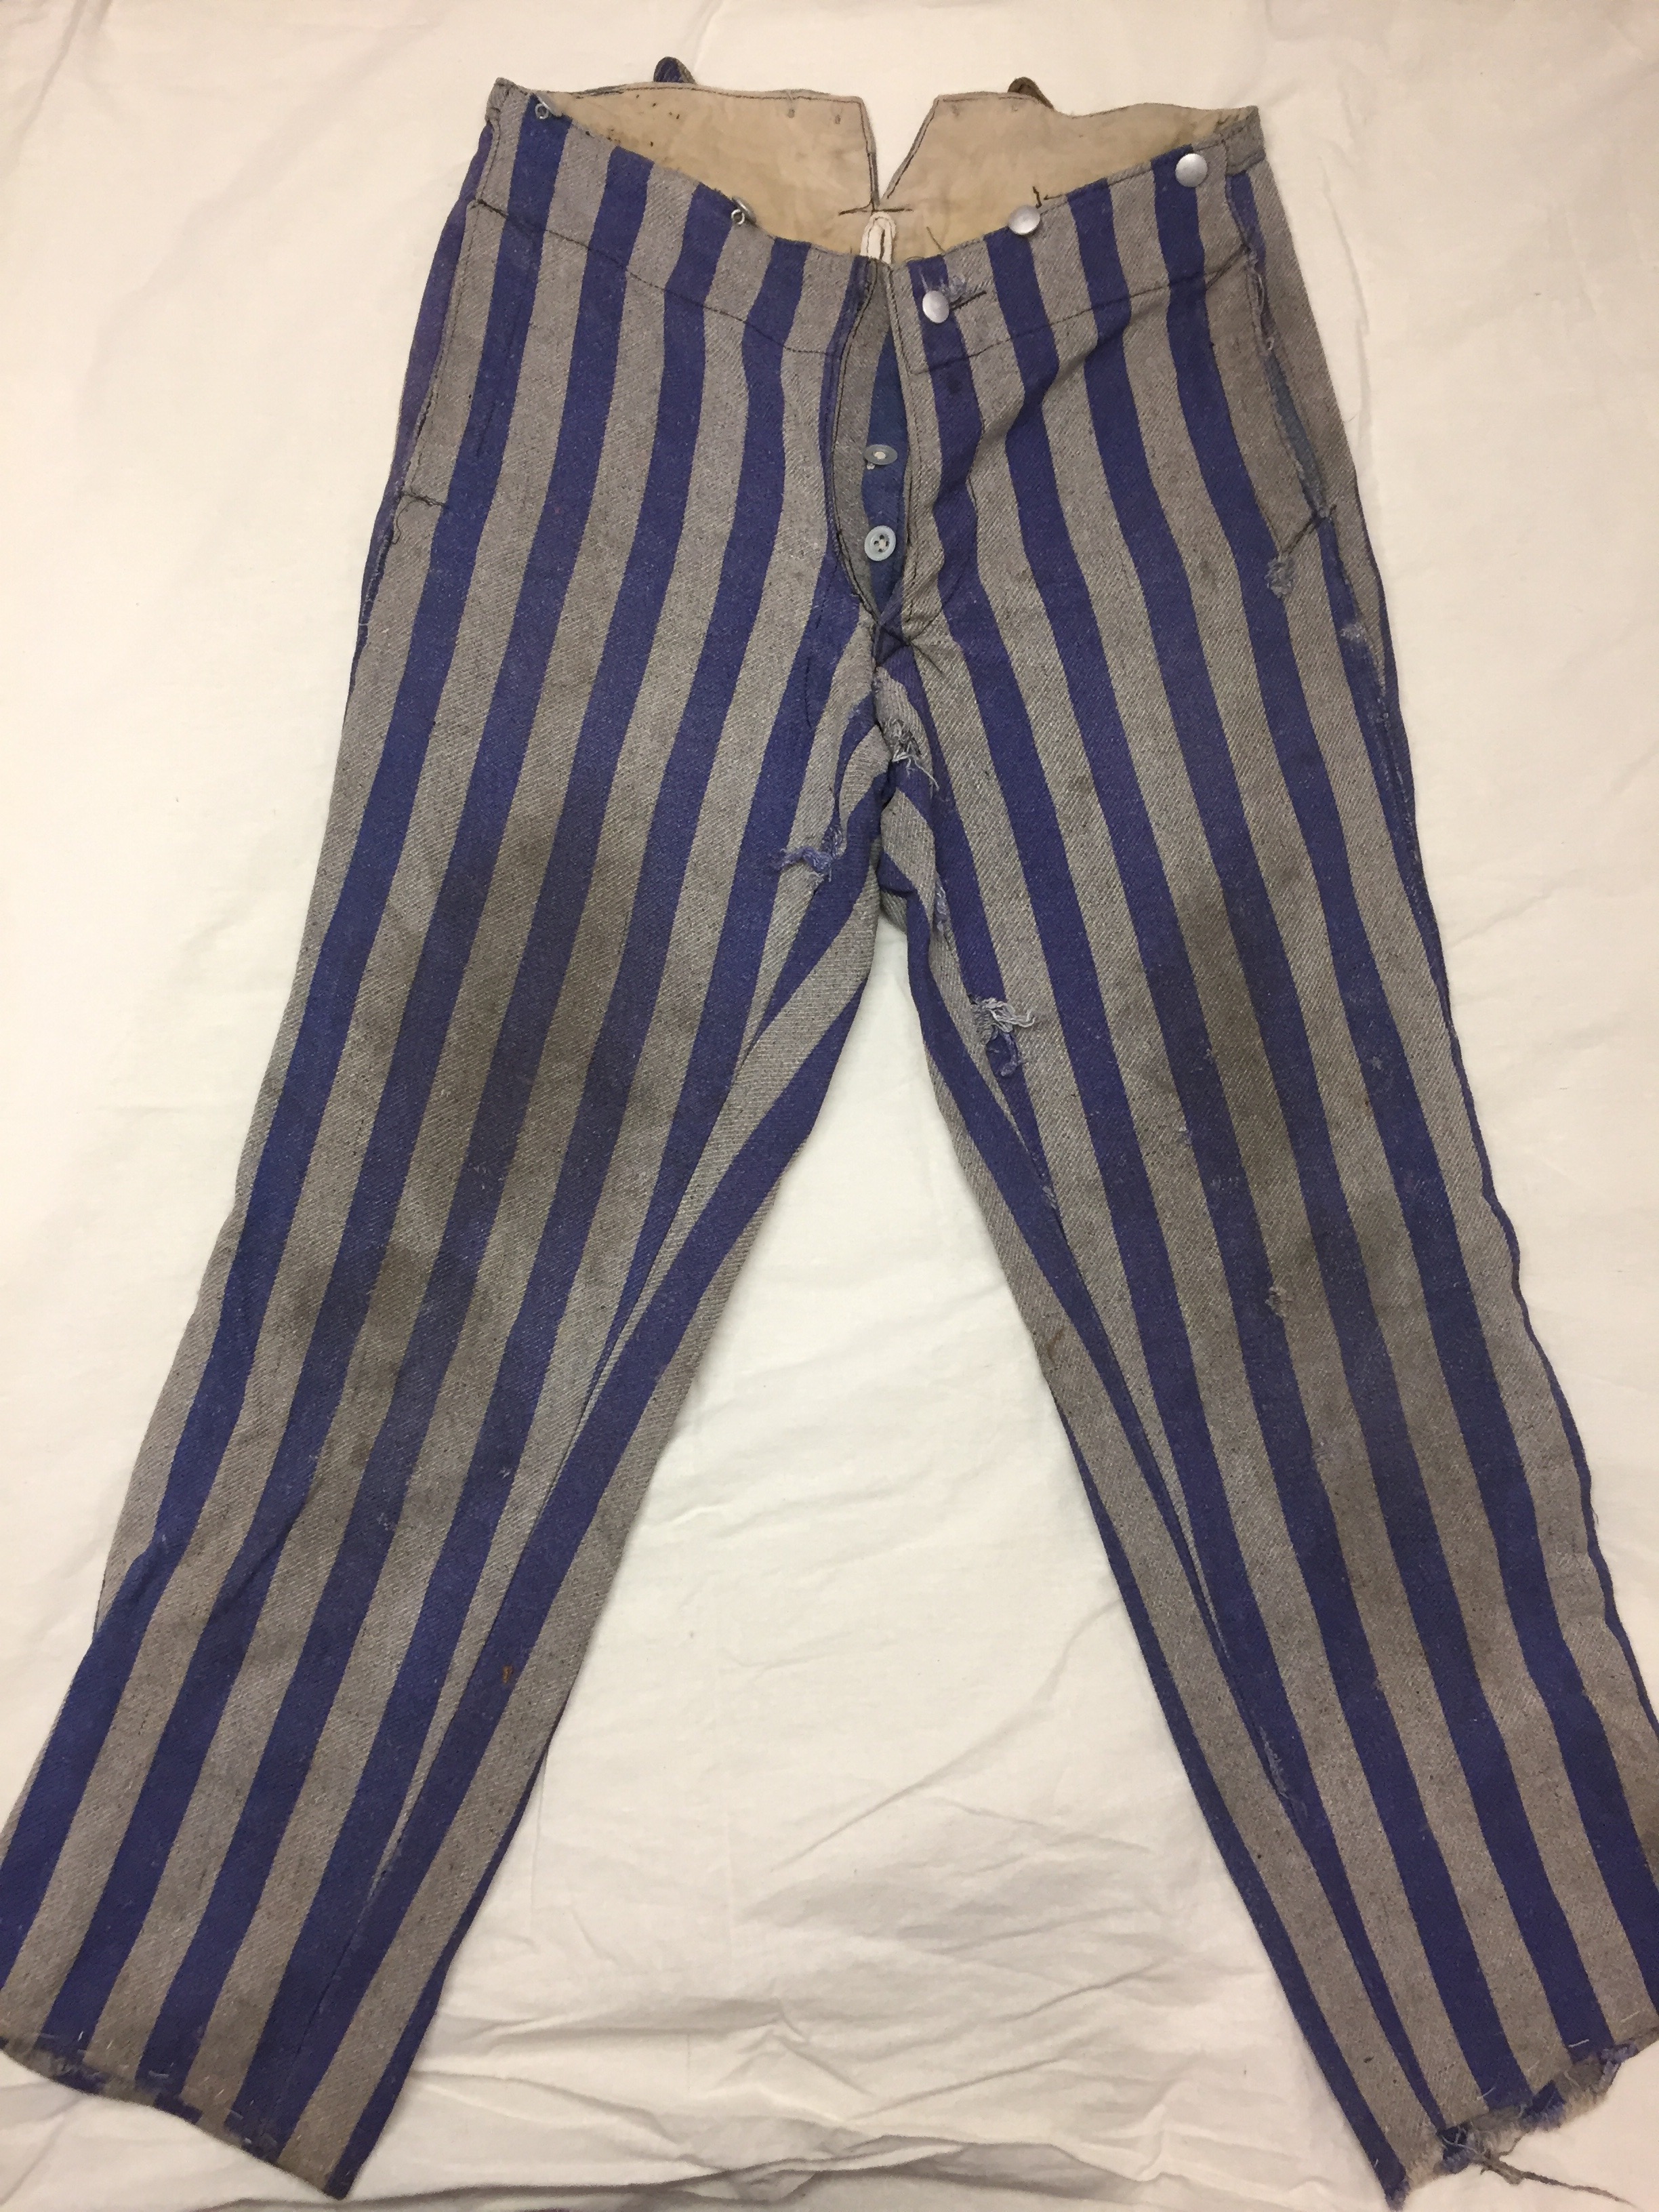 A pair of pants from Auschwitz - Sydney Jewish Museum